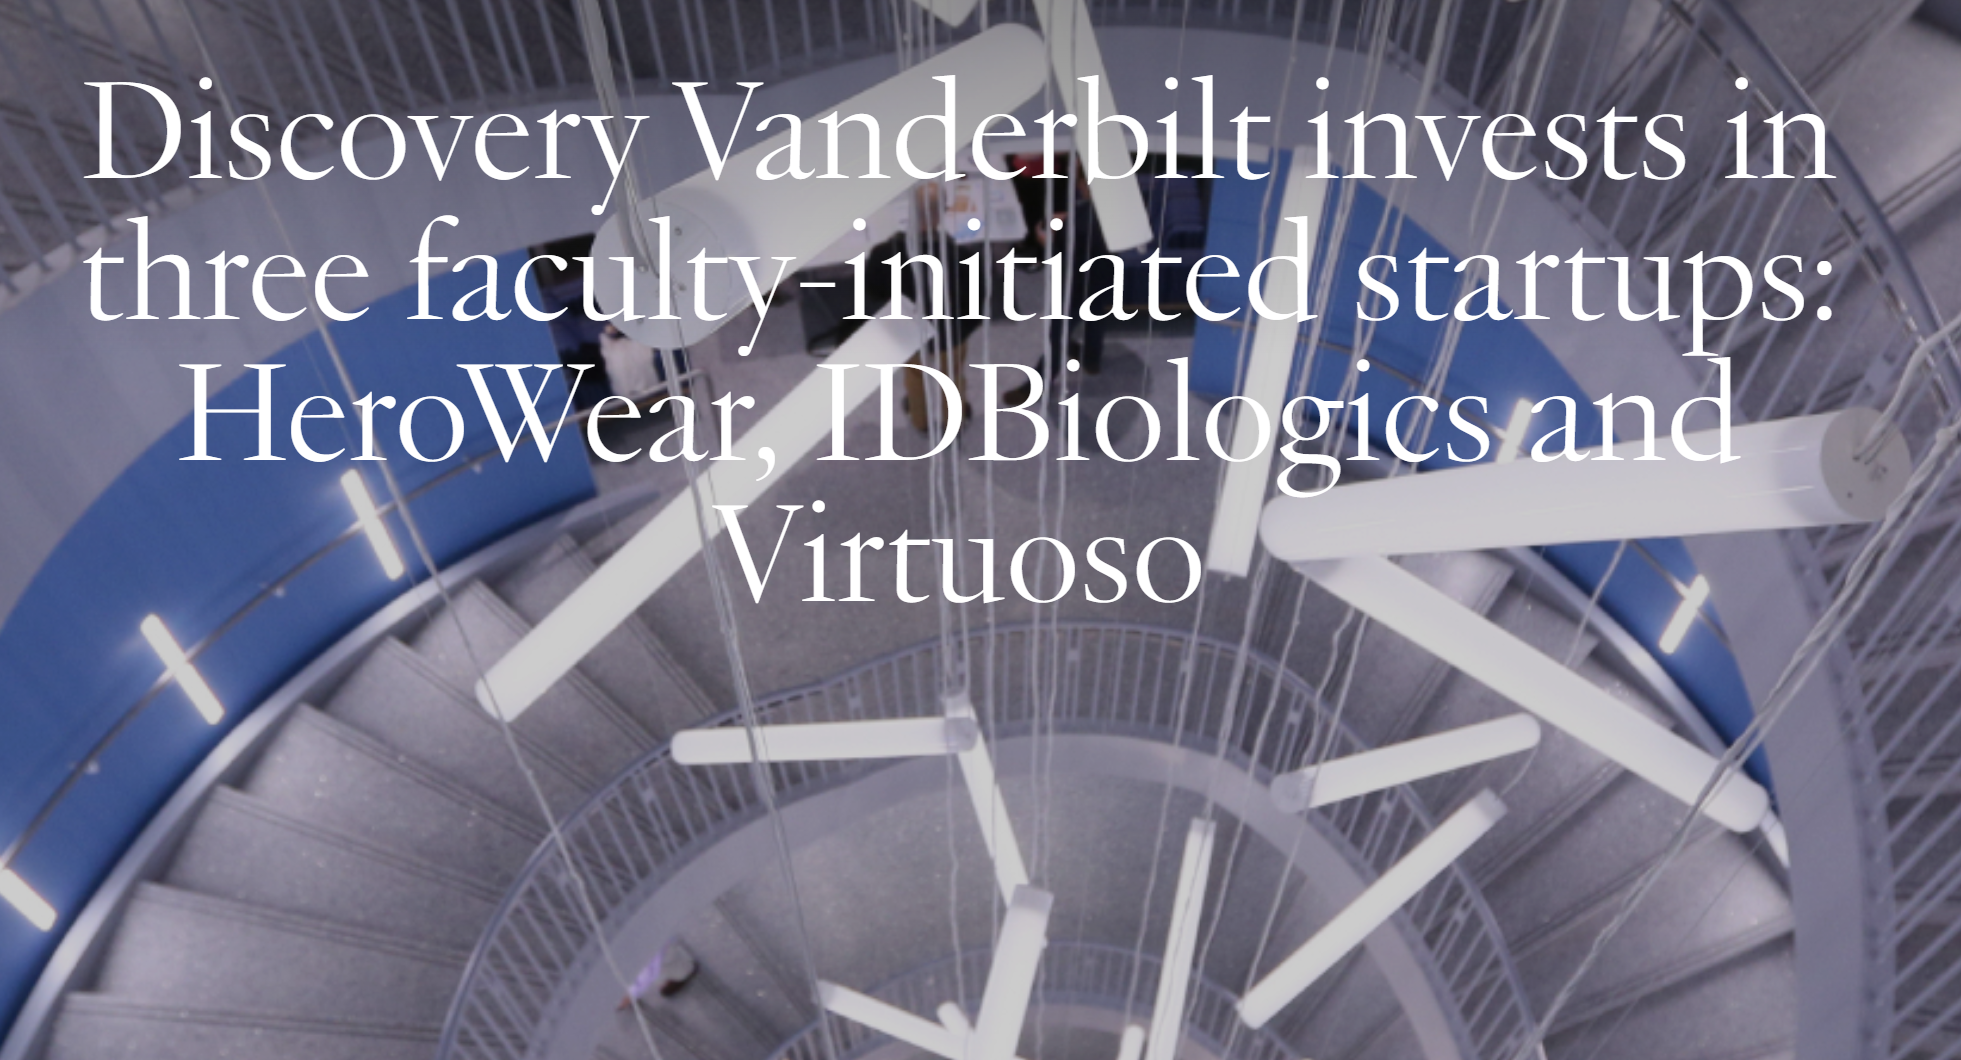 Discovery Vanderbilt invests in three faculty-initiated startups: HeroWear, IDBiologics and Virtuoso